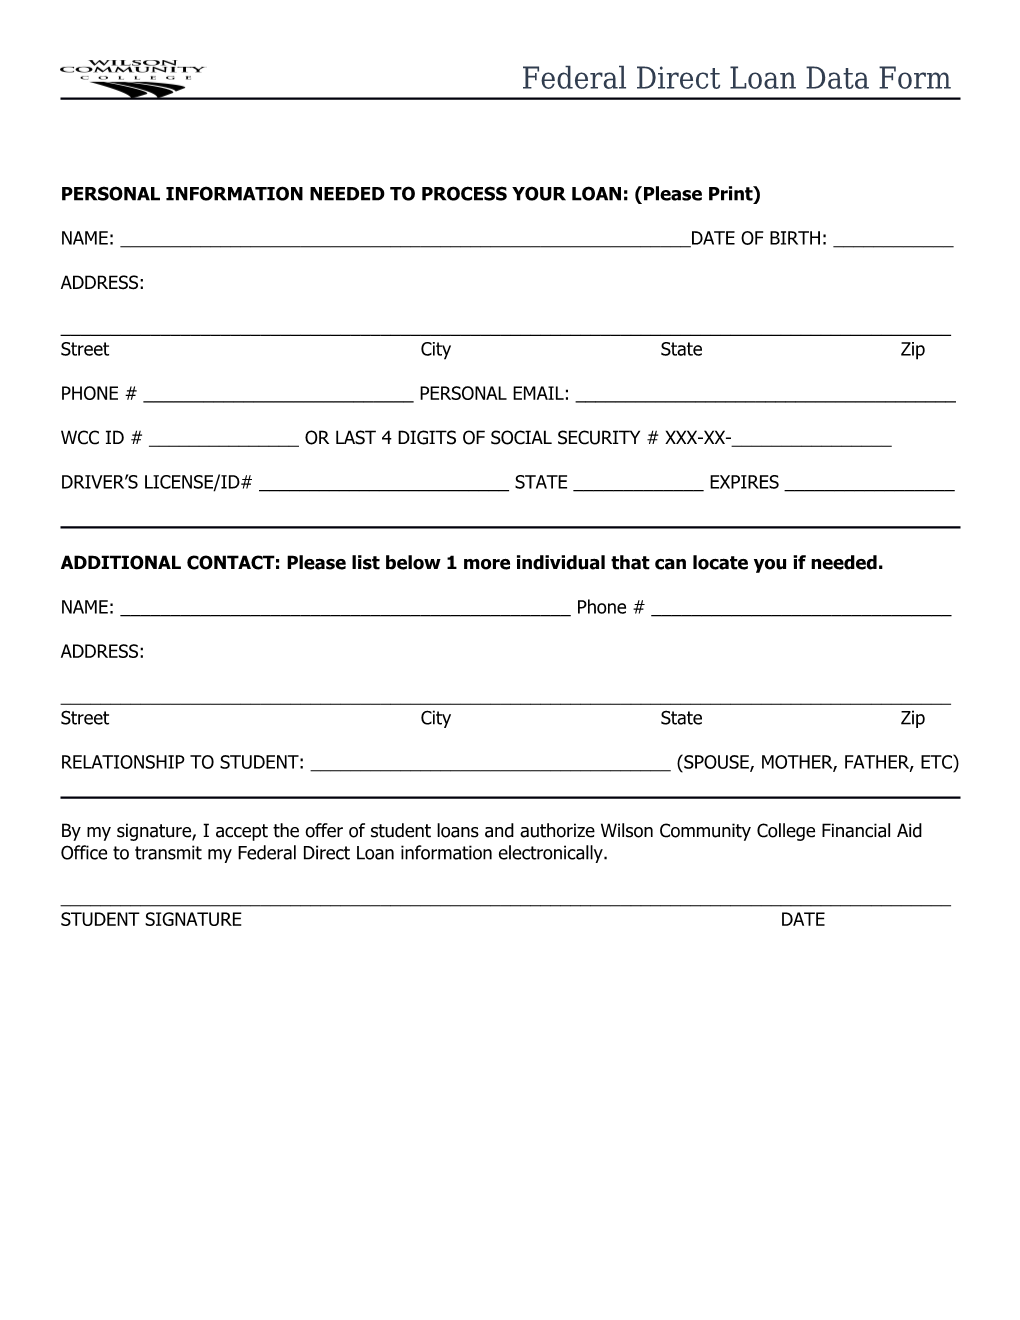 This Form Is to Be Completed and Returned Asap To